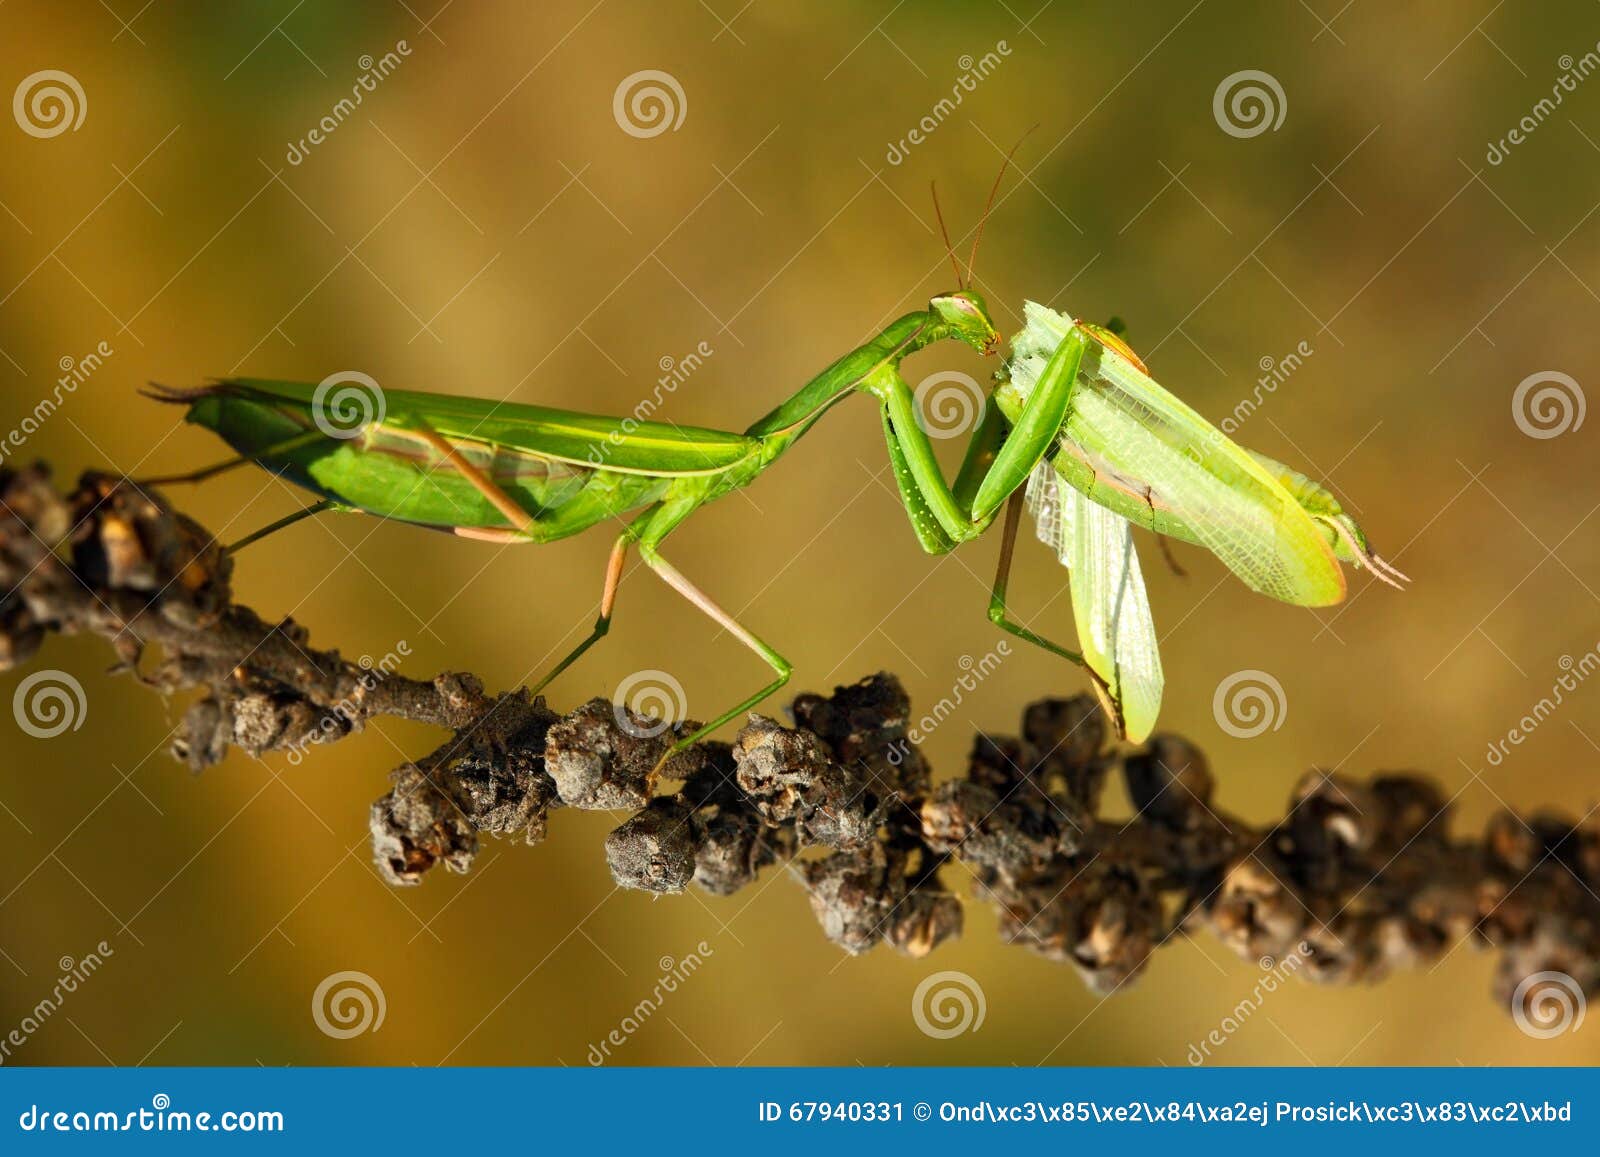 matins eating mantis, two green insect praying mantis on flower, mantis religiosa, action scene, czech republic